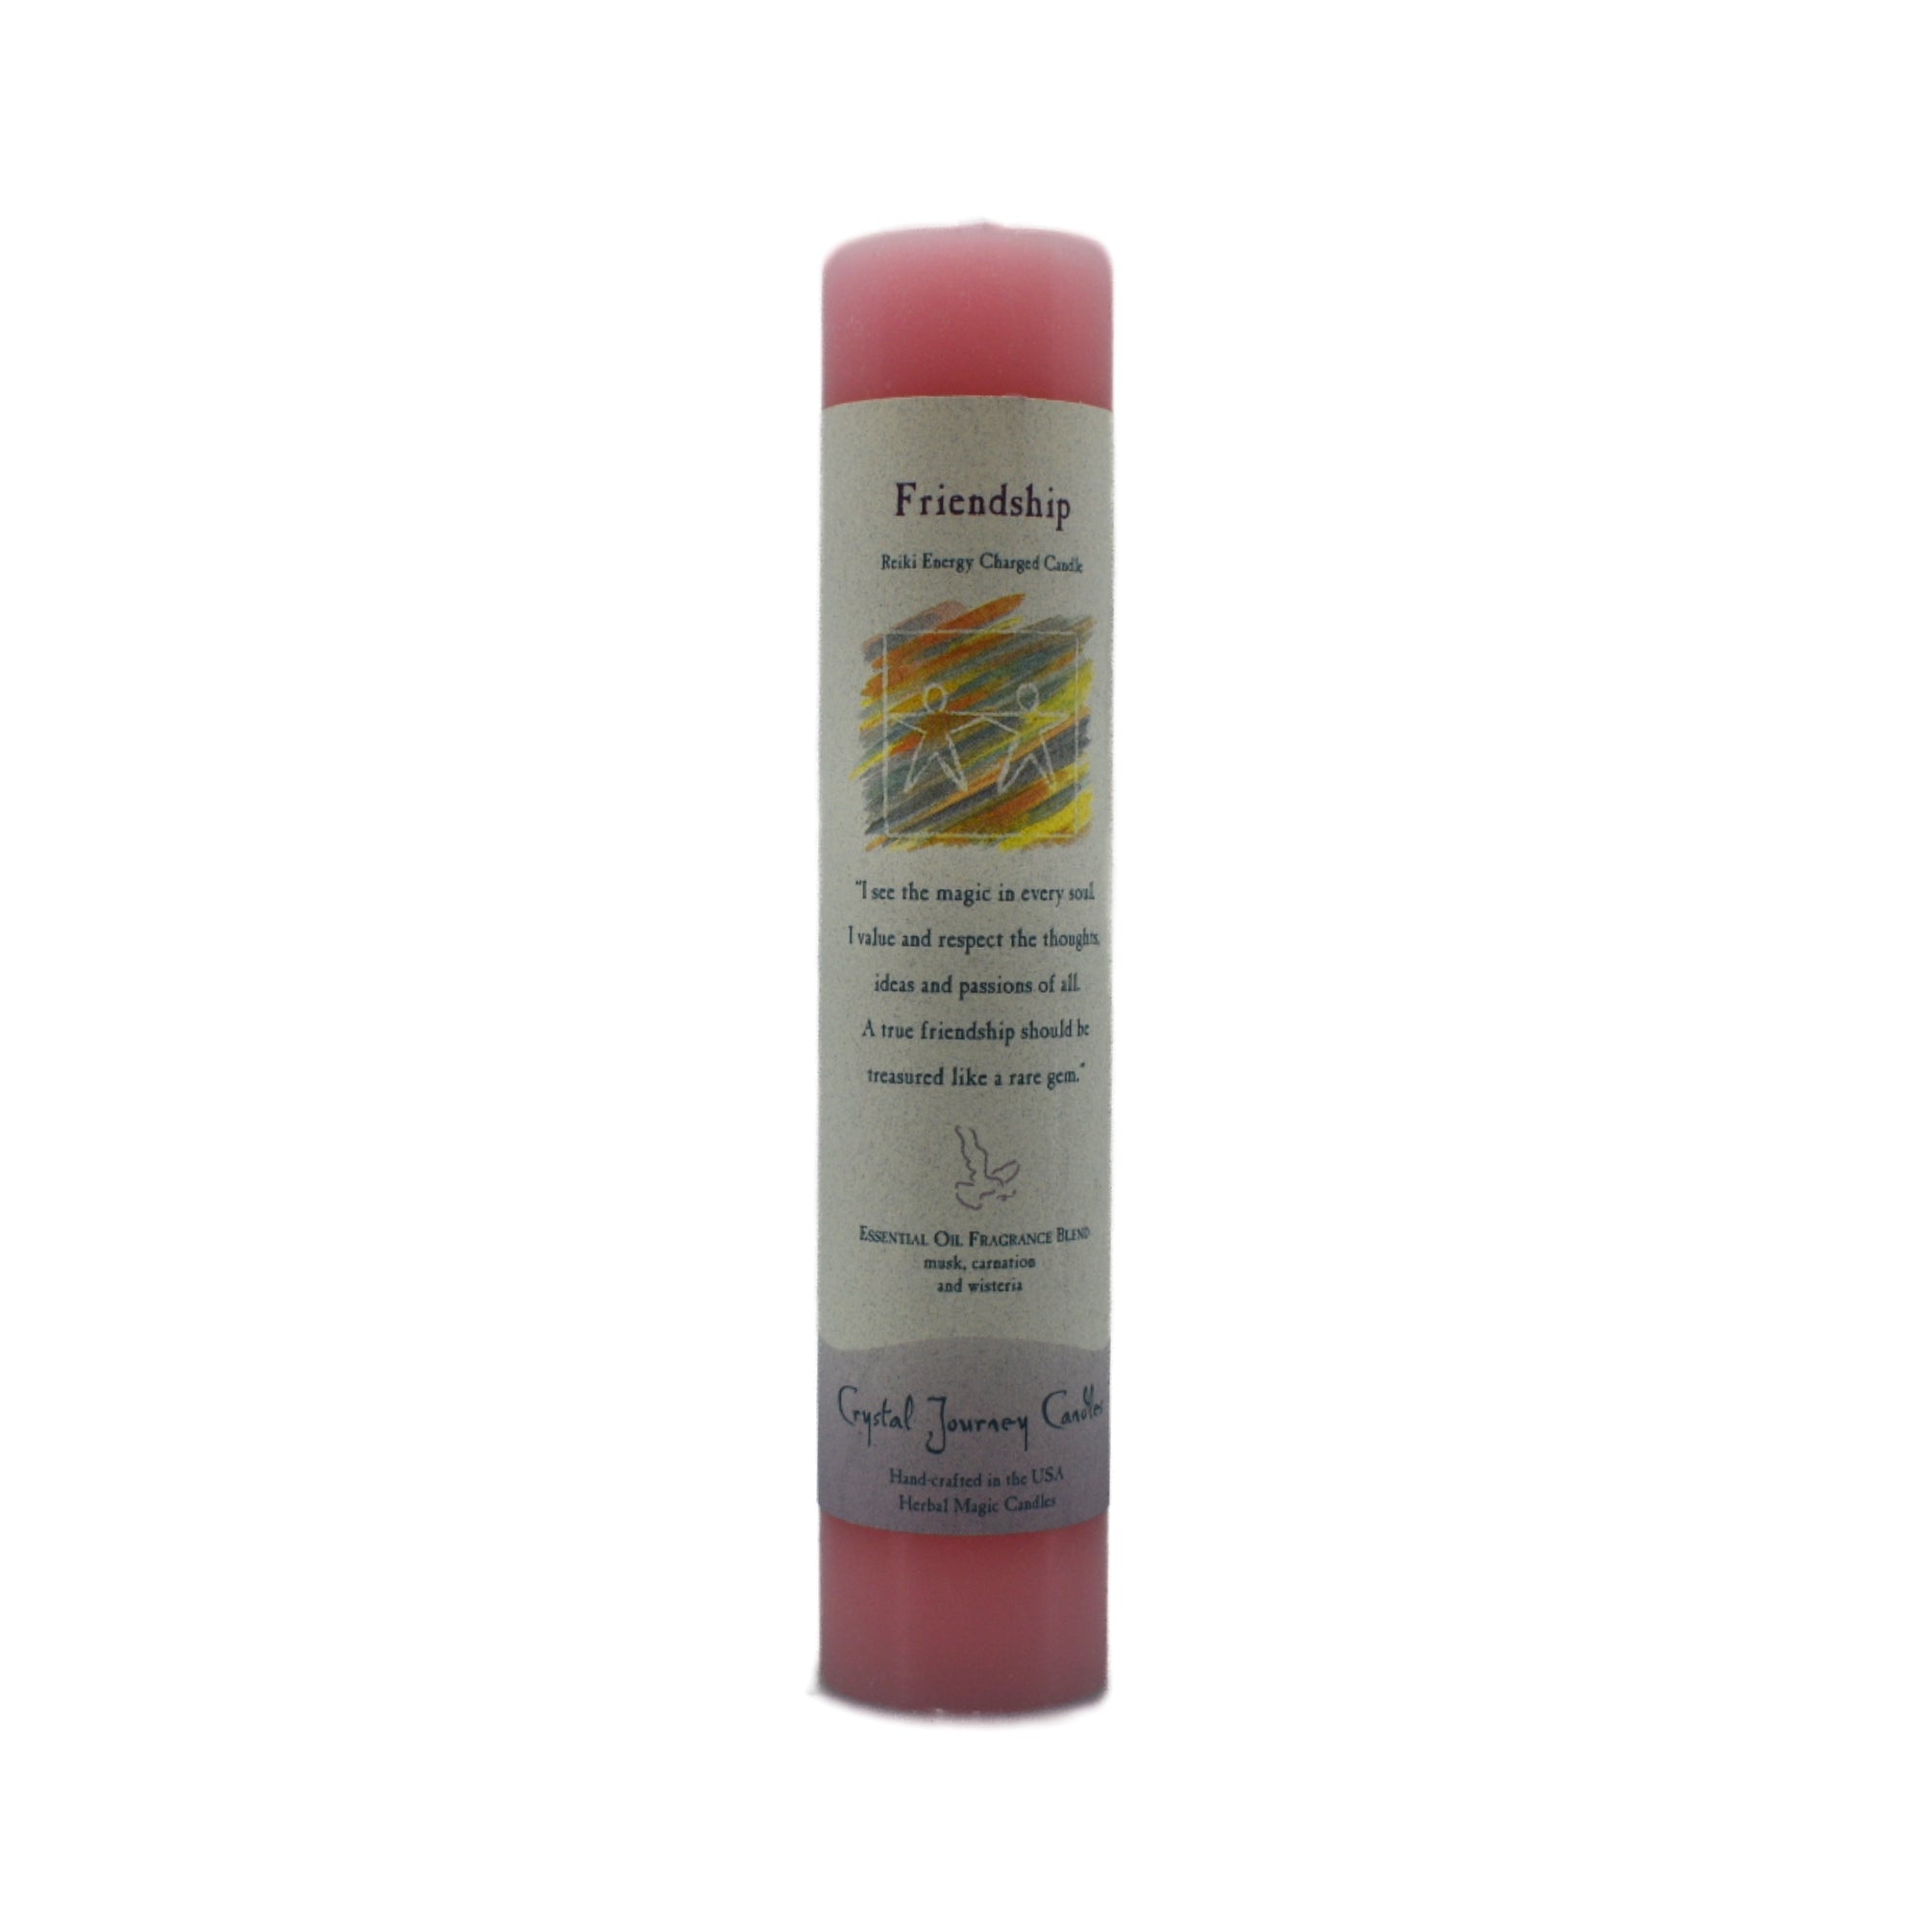 Friendship Pillar Candle.  This pink candle has musk, carnation and wisteria scented essential oils.  Use this candle to attract new friends or strengthen existing relationships.  